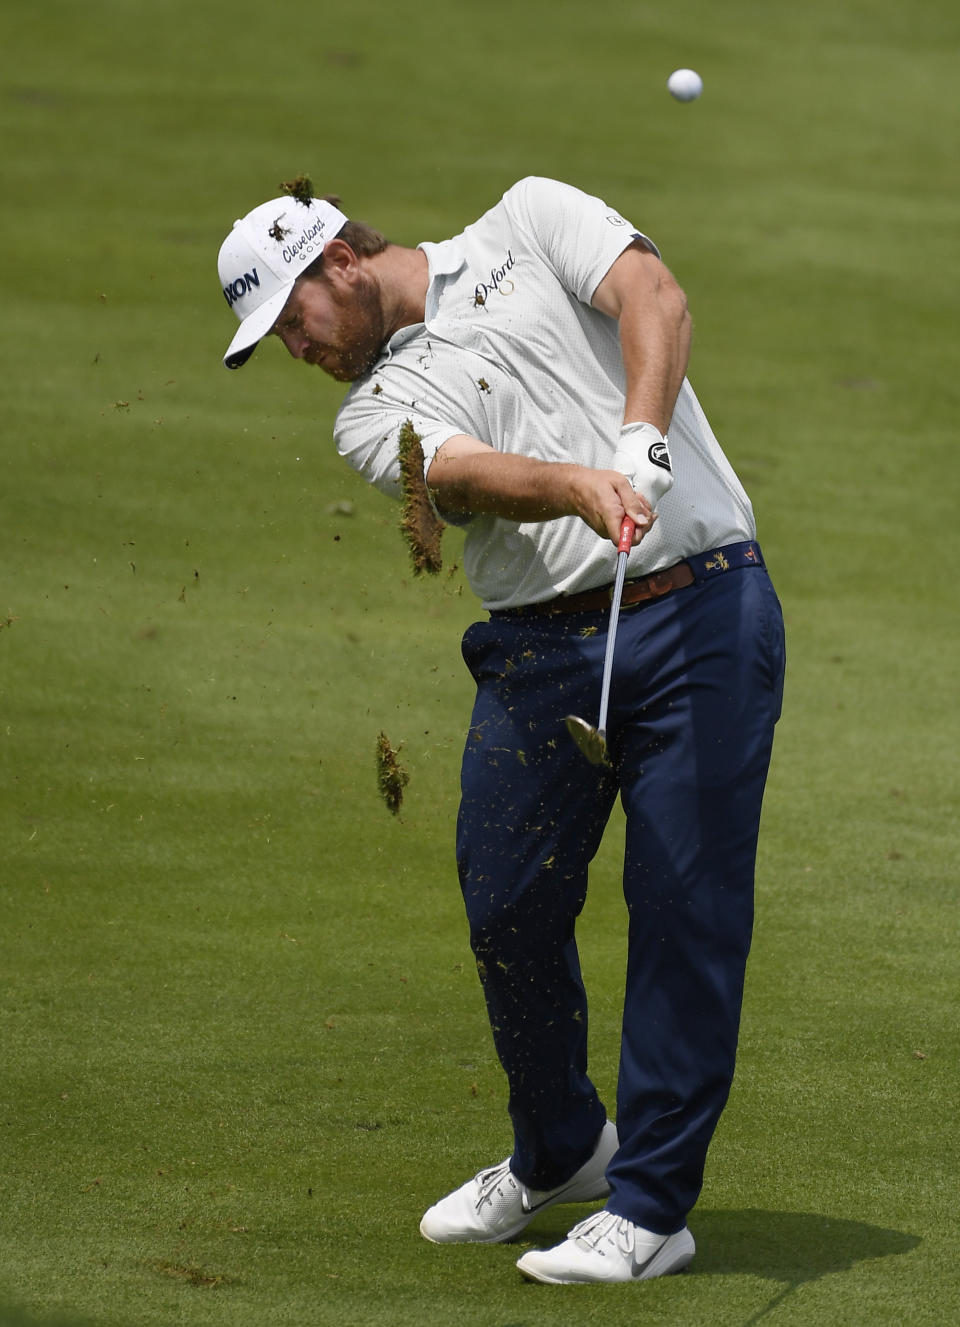 Zack Sucher hits a shot on the first hole during the third round of the Travelers Championship golf tournament, Saturday, June 22, 2019, in Cromwell, Conn. (AP Photo/Jessica Hill)